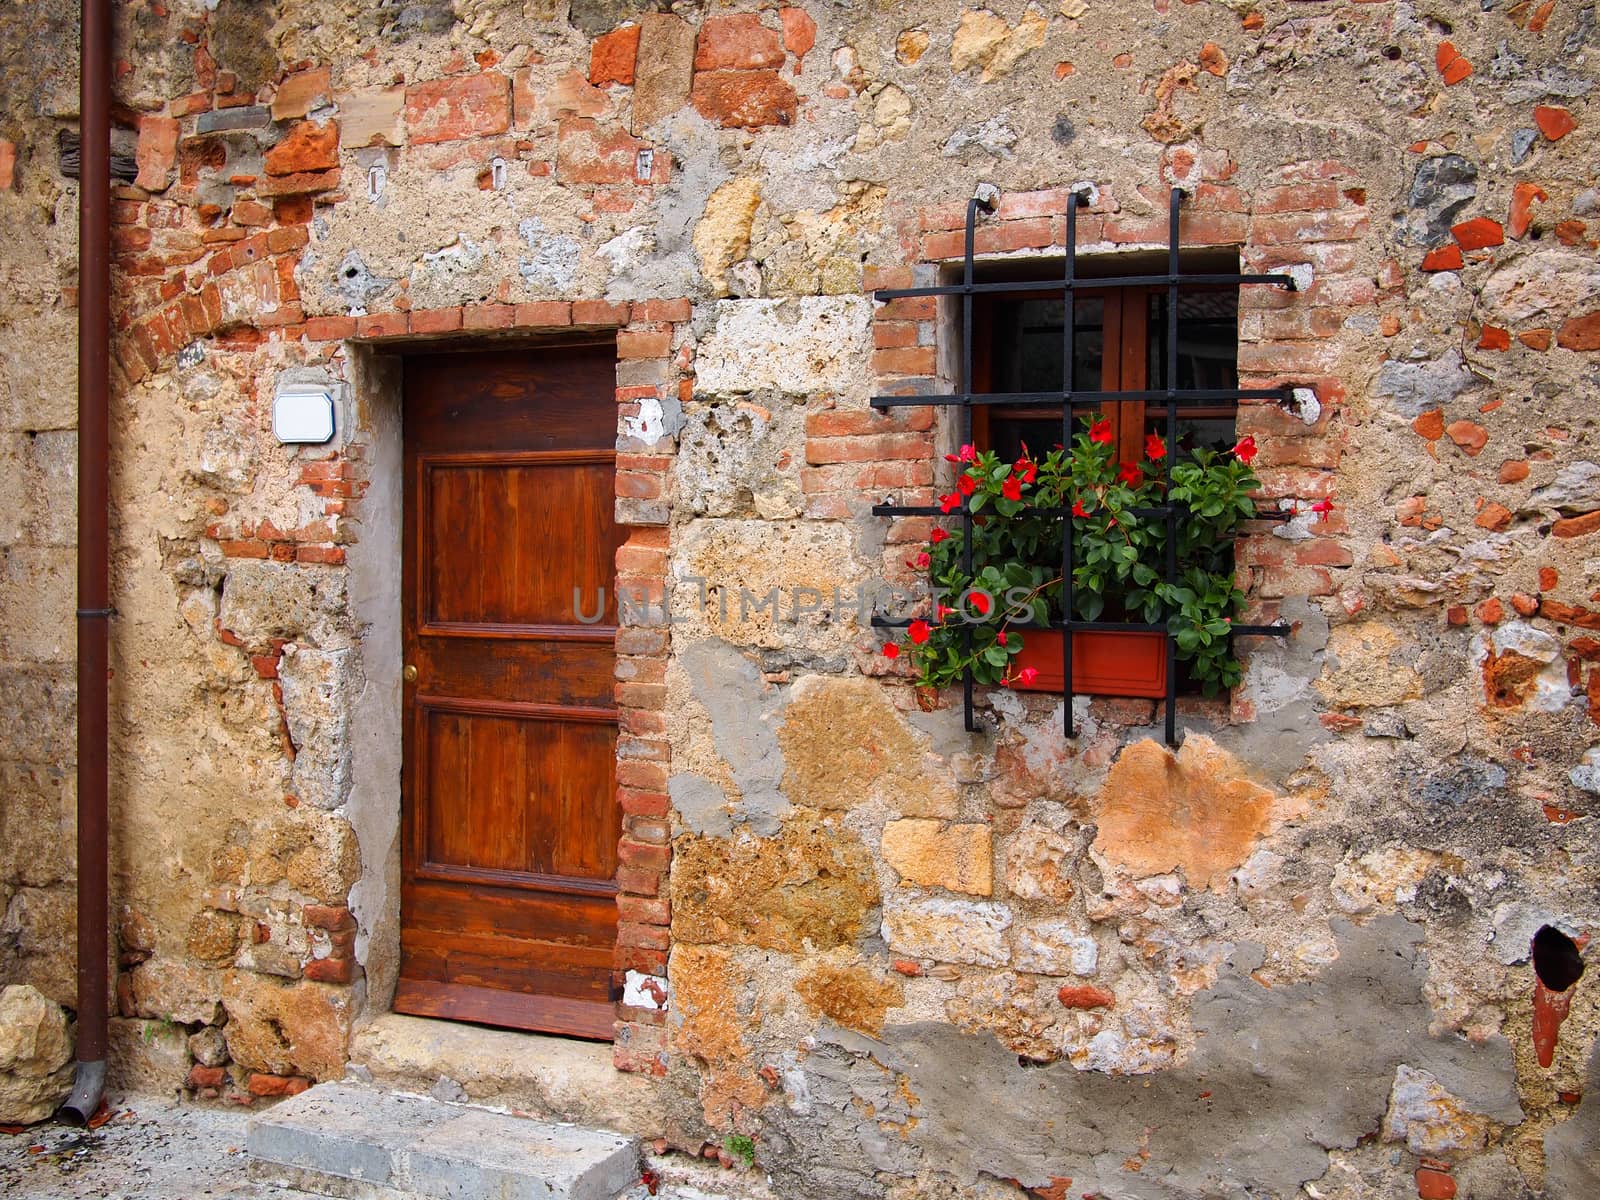 Old wooden door in a brick facade with flowers of a house in an old Italian town.